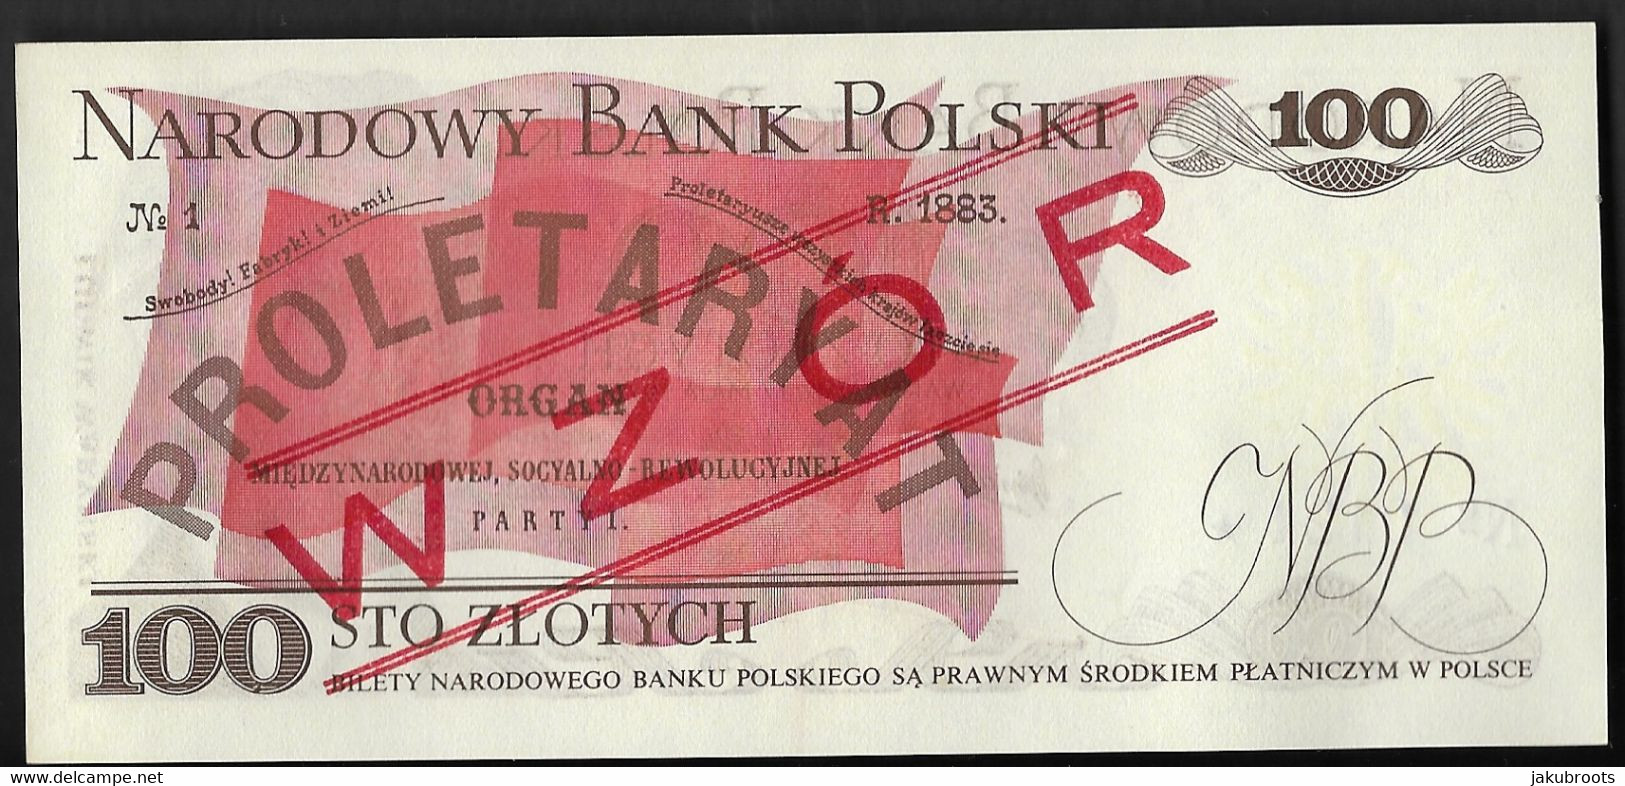 MAY 1976 POLISH NATIONAL STATE BANK 100 Zl.SPECIMEN / WZOR  Mint Condition - Pologne